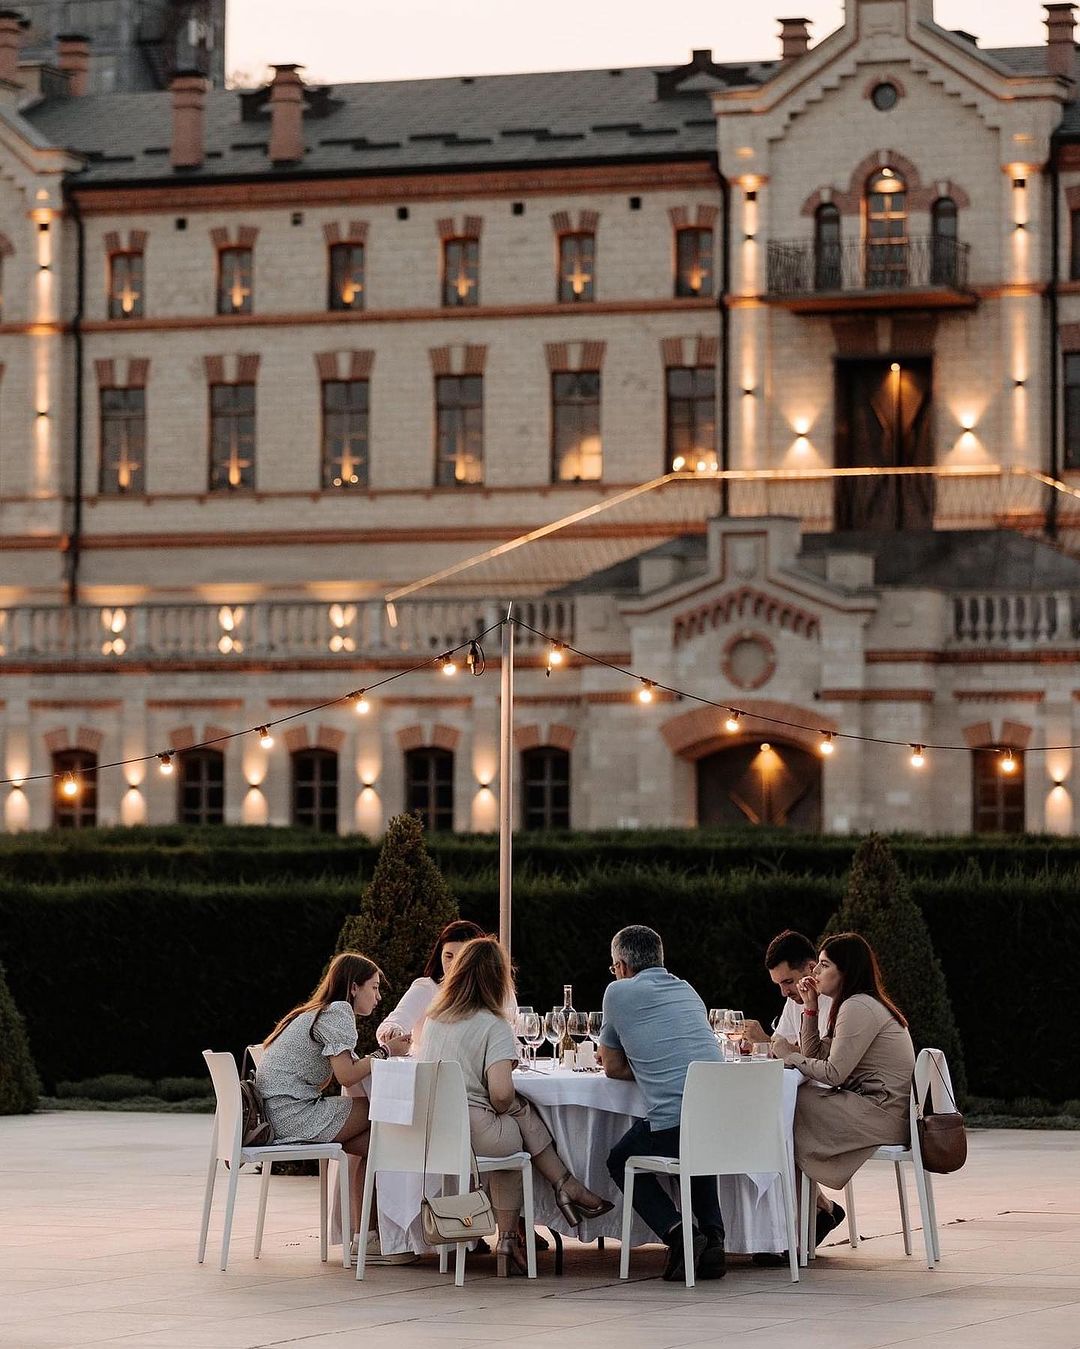 Outdoor dining, a new tradition at Castel Mimi